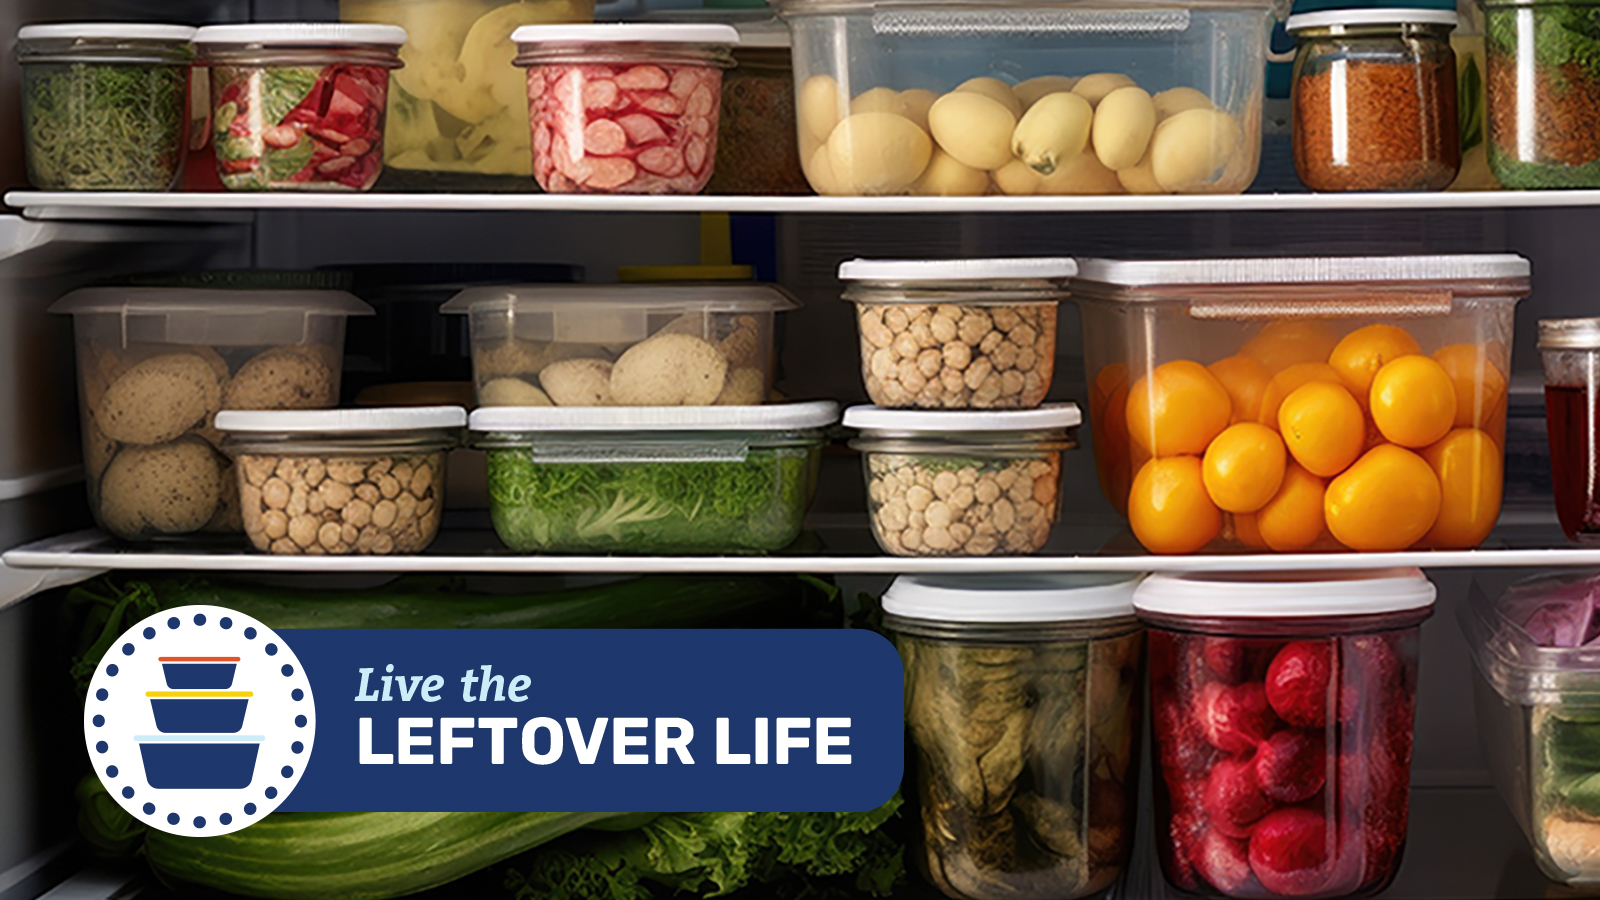 How to choose the right container for storing your leftovers